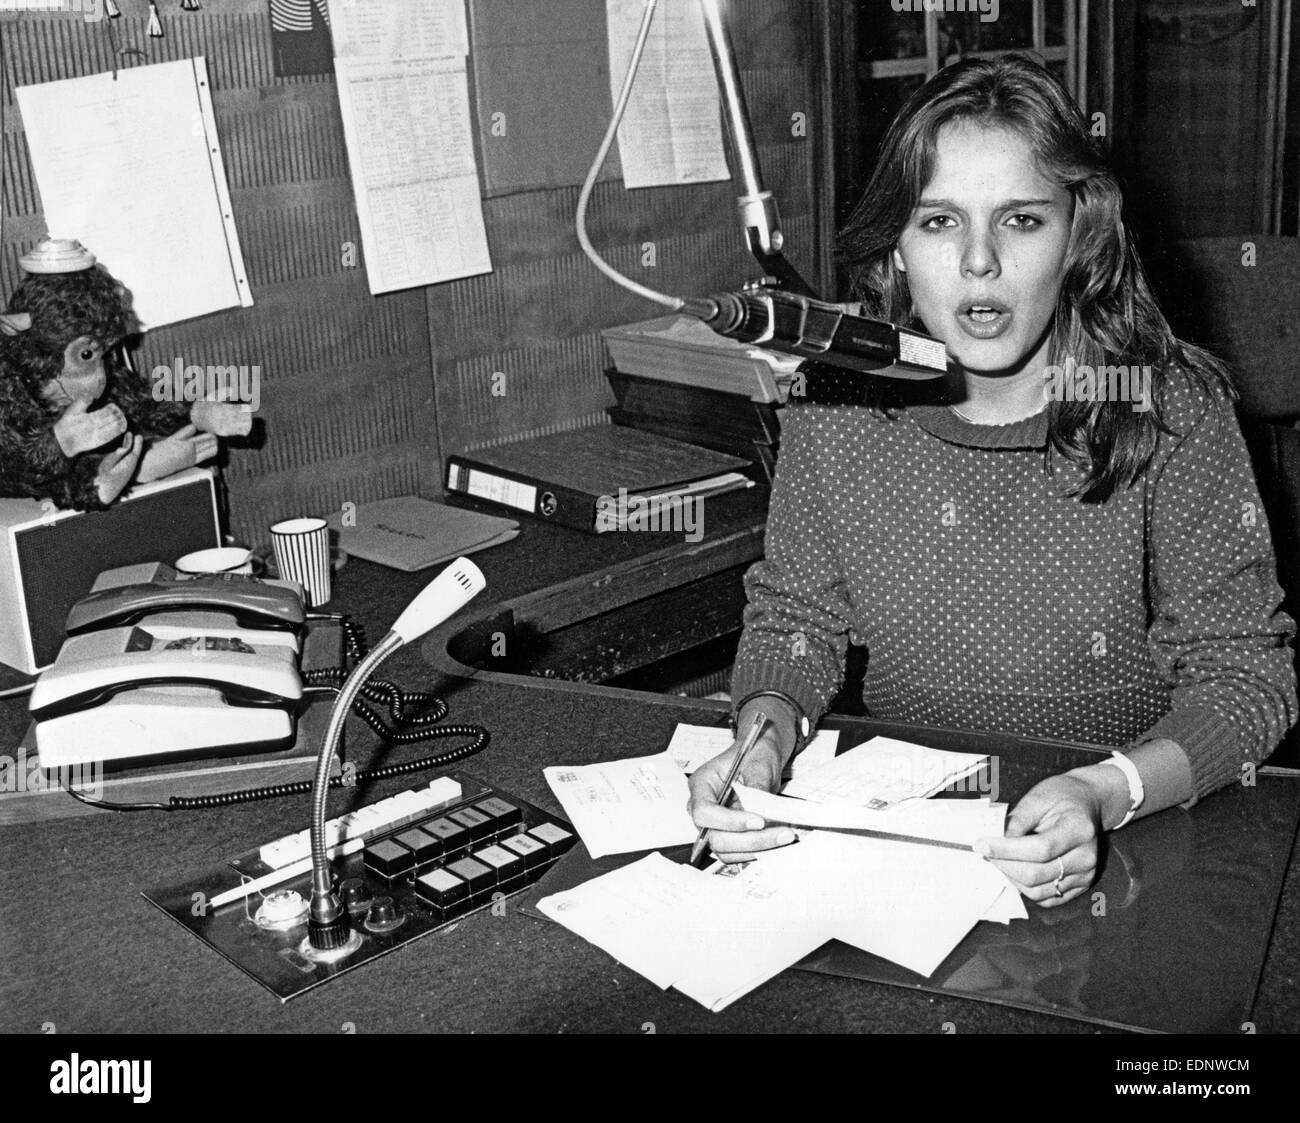 Young Deisree Nosbusch (15) in October 1980 moderating in the studio of the radiostation RTL in Luxembourg. Actress Desiree Nosbusch - also known as Desiree Becker - was born on 14 January 1965 in Esch in Luxembourg. Stock Photo